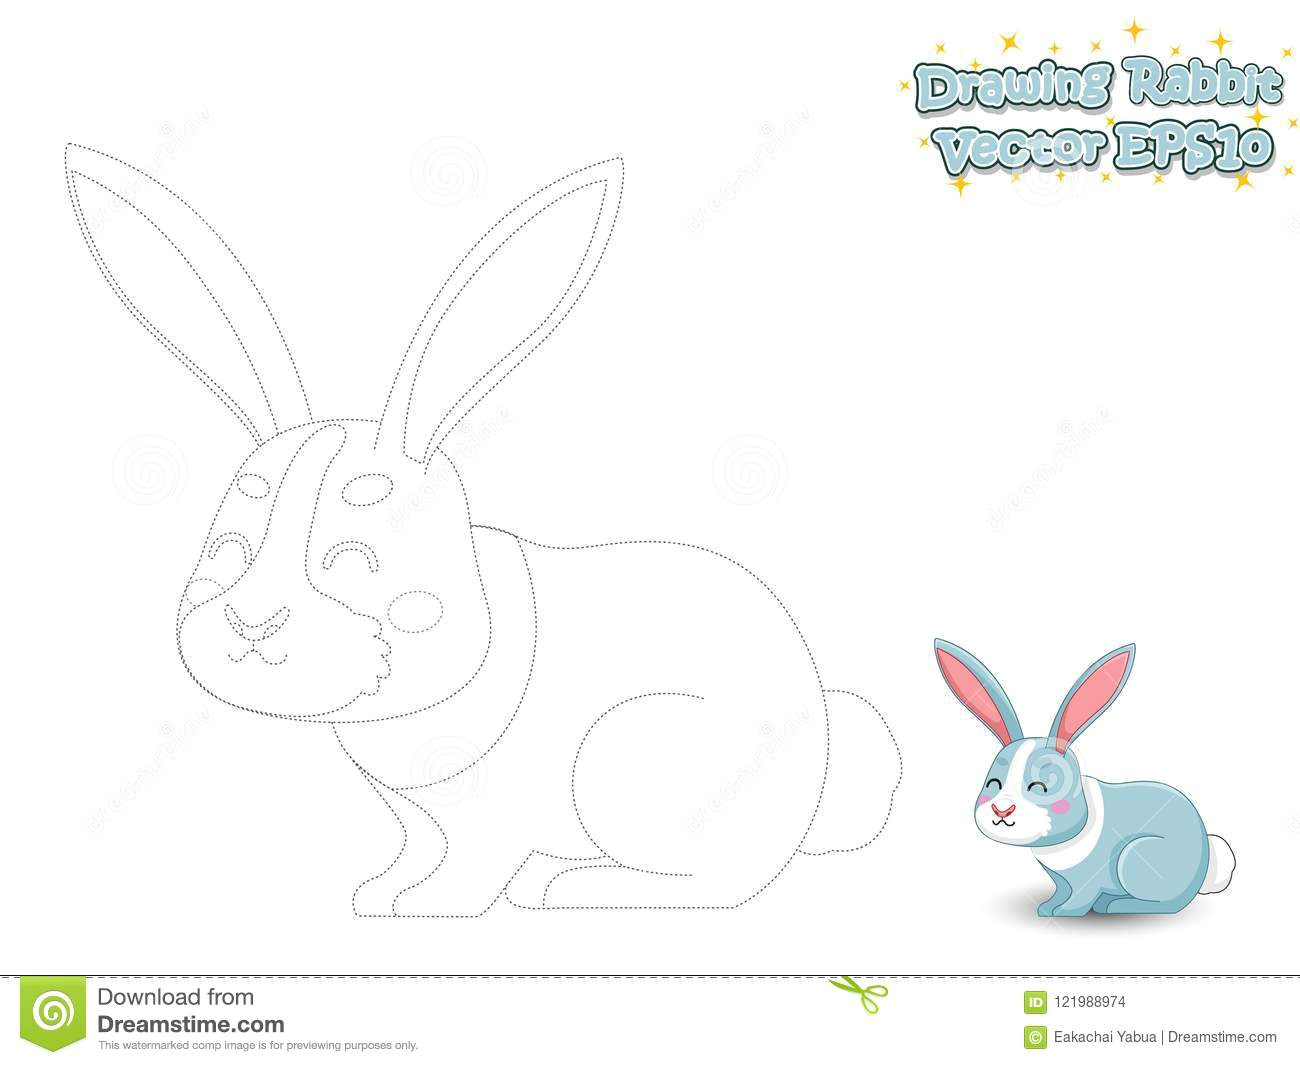 Drawing Vector Cartoons Drawing and Paint Cute Cartoon Rabbit Educational Game for Kids